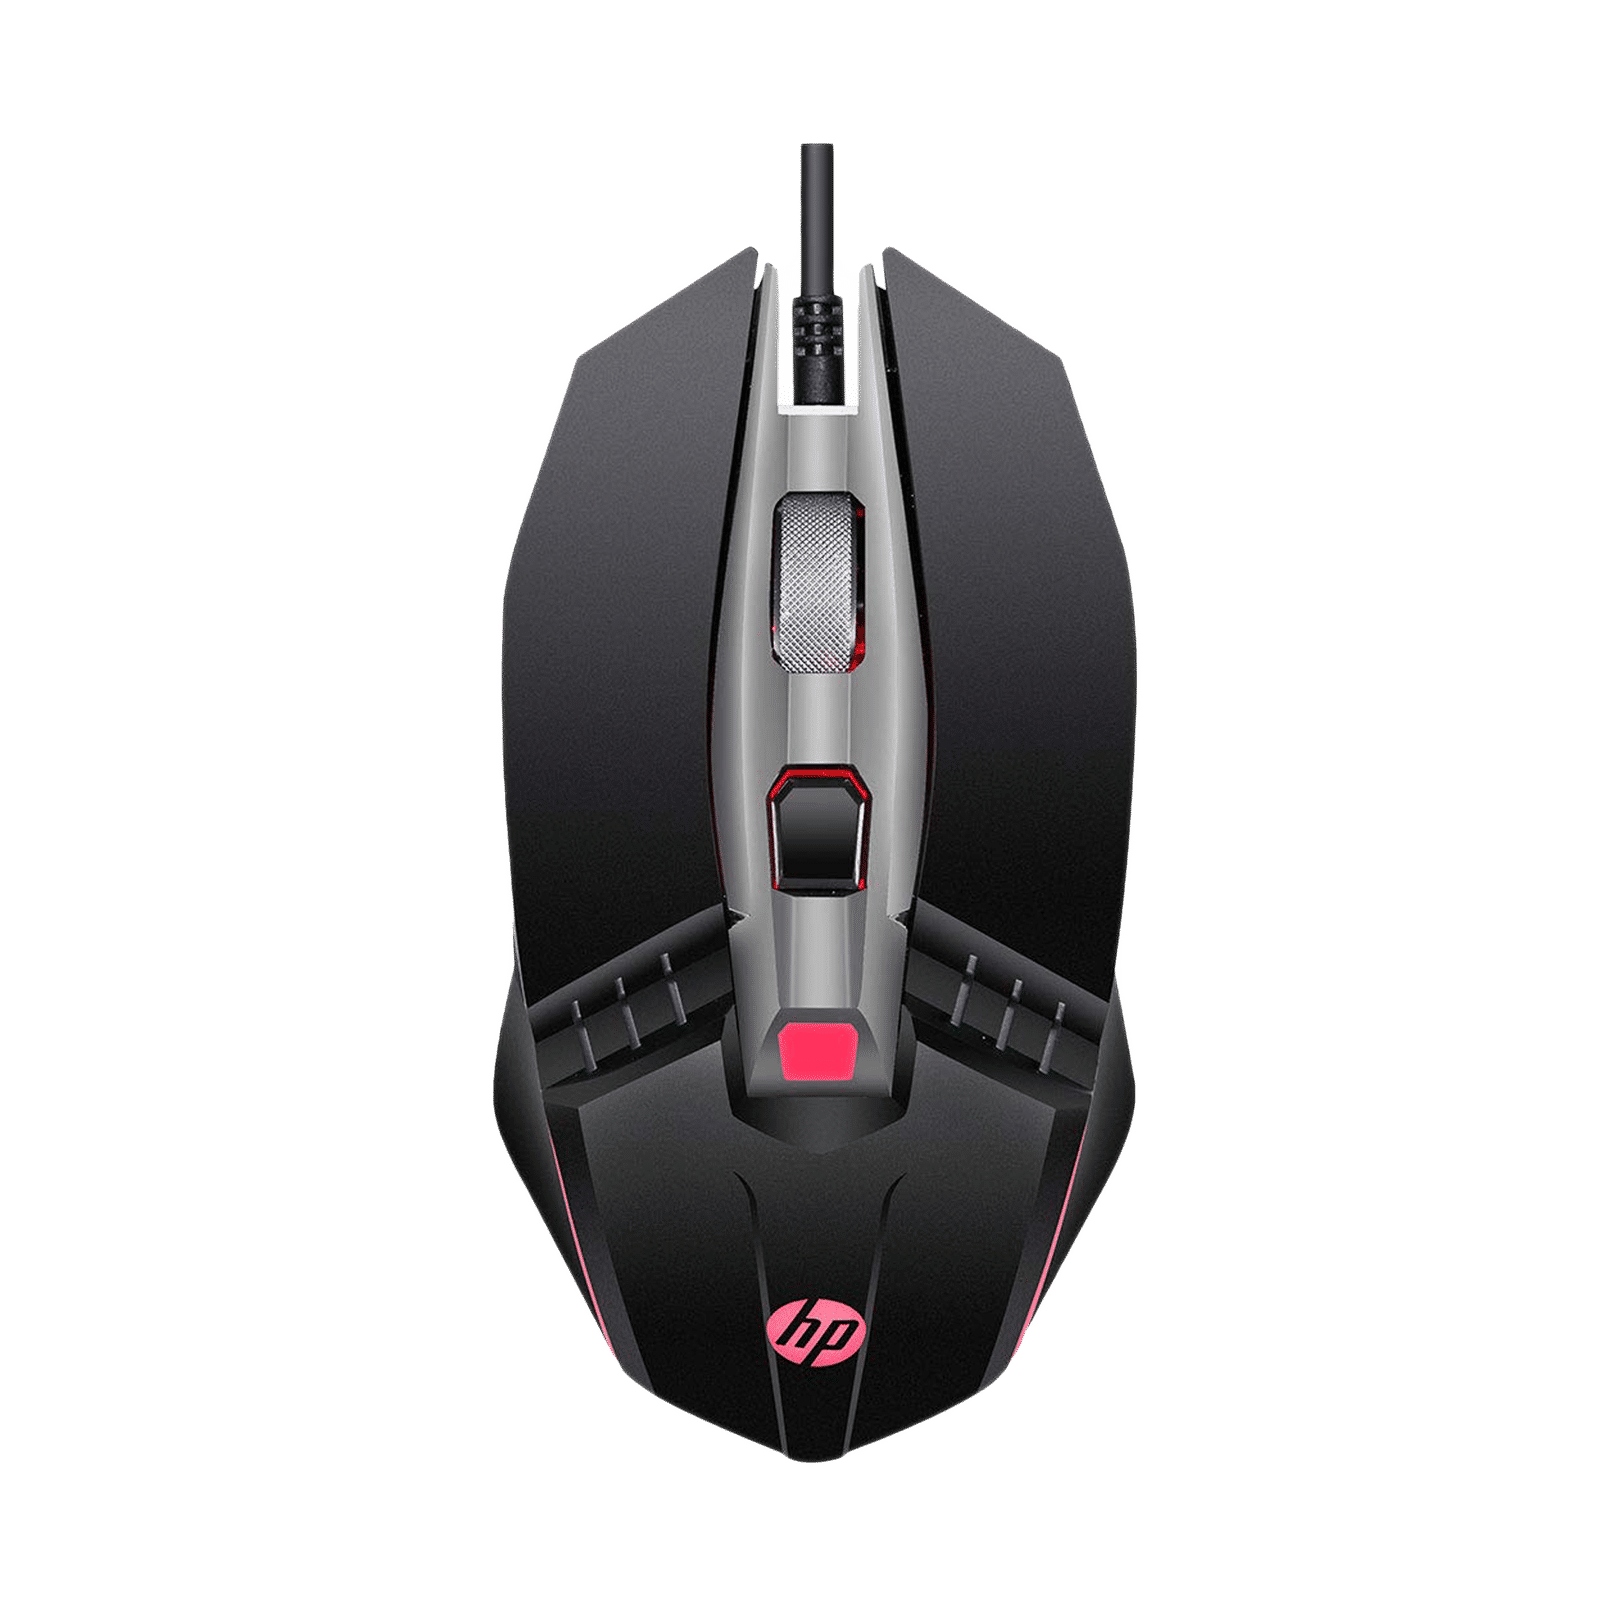 Buy HP M270 Wired Optical Gaming Mouse with Customizable Buttons (2400 DPI,  Ergonomic Design, Black) Online – Croma